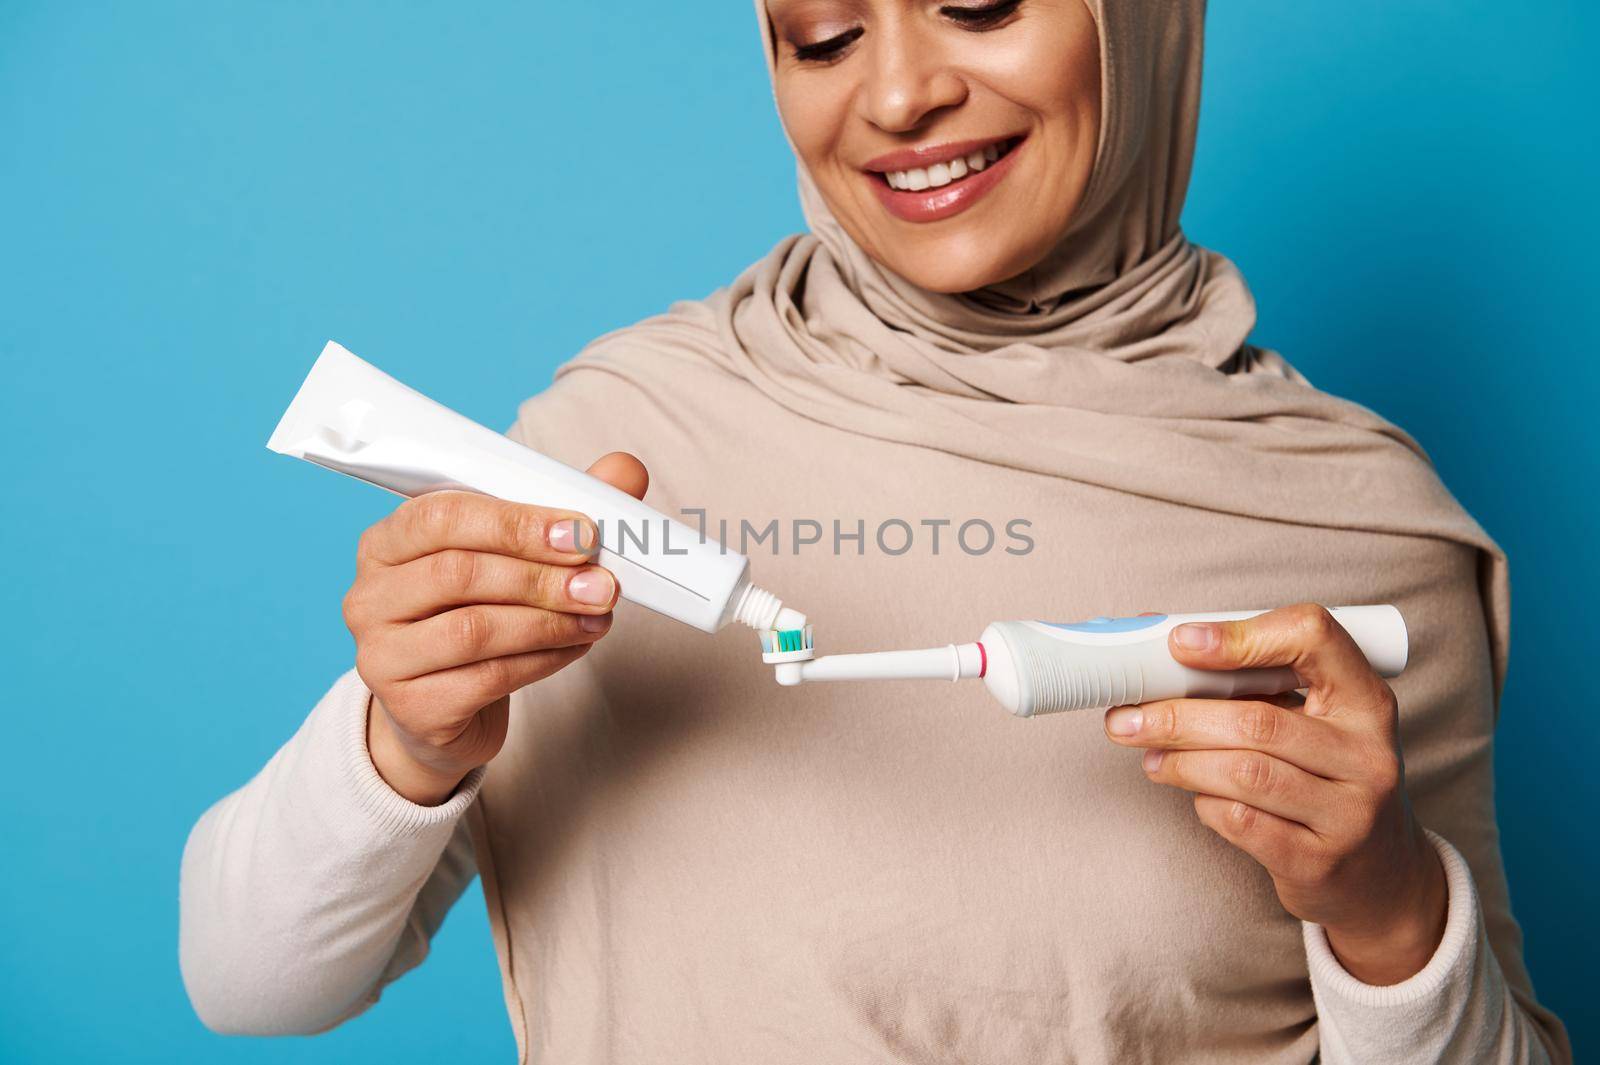 Close-up woman with a beautiful smile squeezes toothpaste from a tube into a toothbrush. Concept of healthy habits and oral care. Blue background, copy space